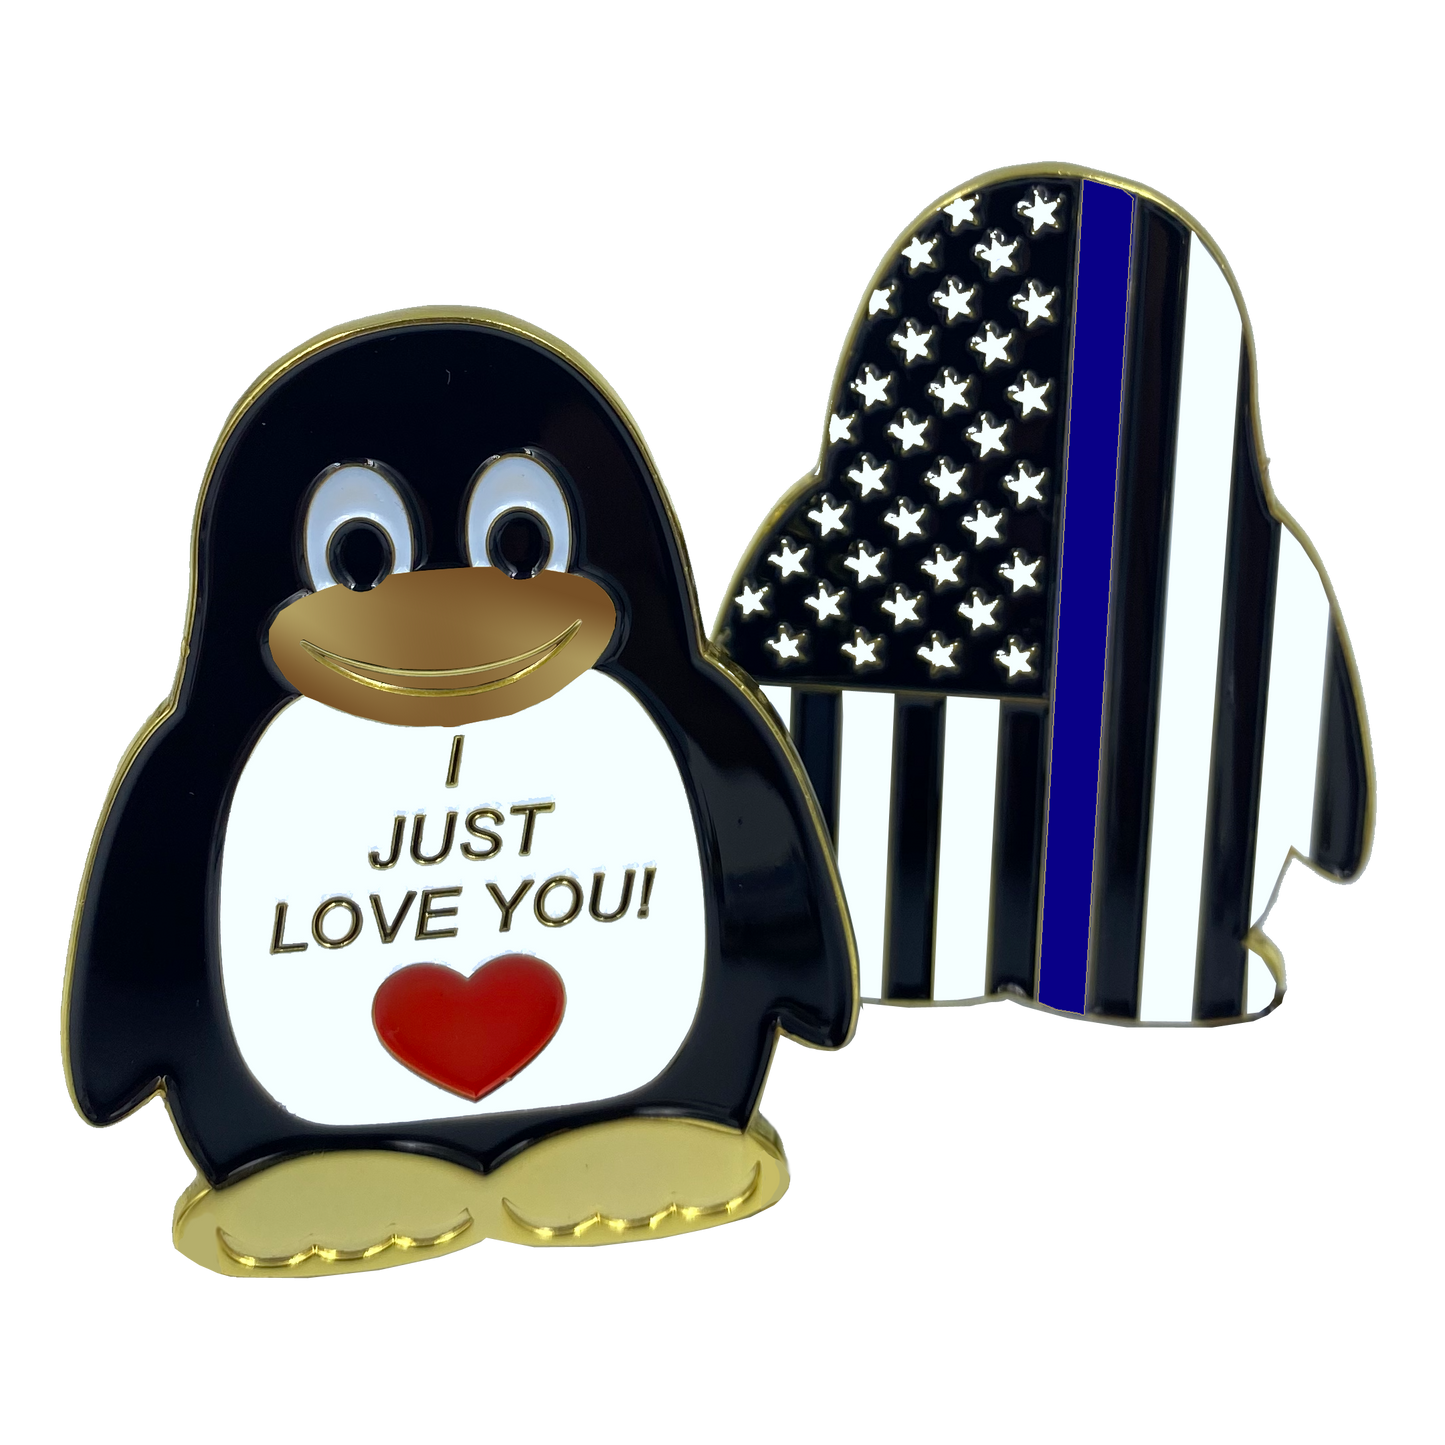 CL2-05 Penguin "I Just Love You" Police Thin Blue Line challenge coin Sheriff Deputy Officer